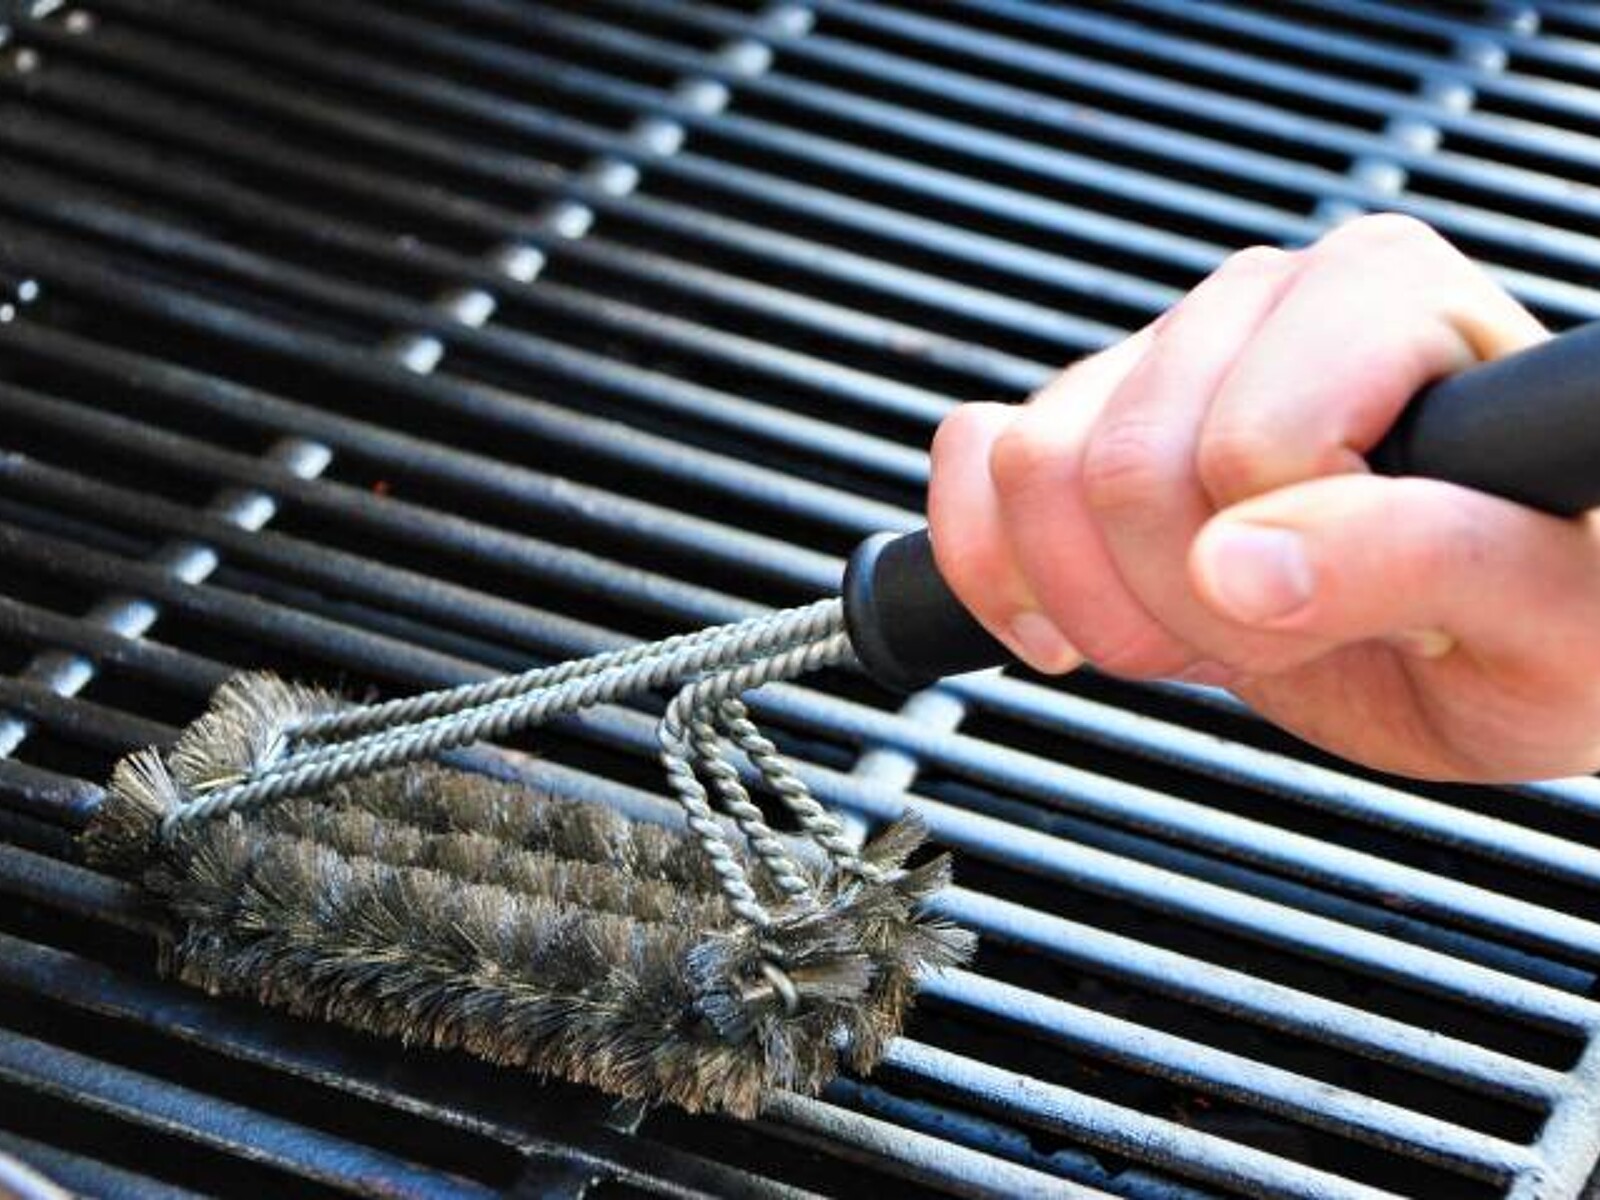 https://images.airtasker.com/v7/https://airtasker-seo-assets-prod.s3.amazonaws.com/en_US/1660041822815_Cleaning-BBQ-with-wire-brush.jpg?gravity=smart&w=1600&h=1200